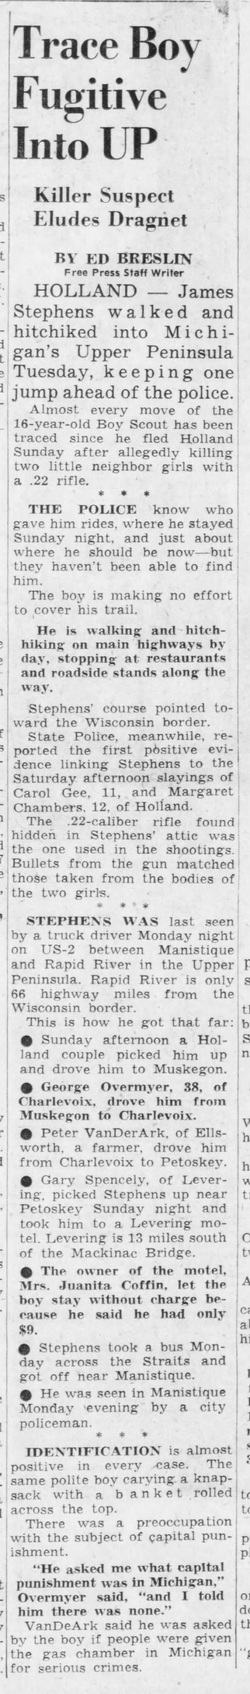 Levering Motel (Gales Motel) - MAY 1961 ARTICLE ON MURDER SUSPECT